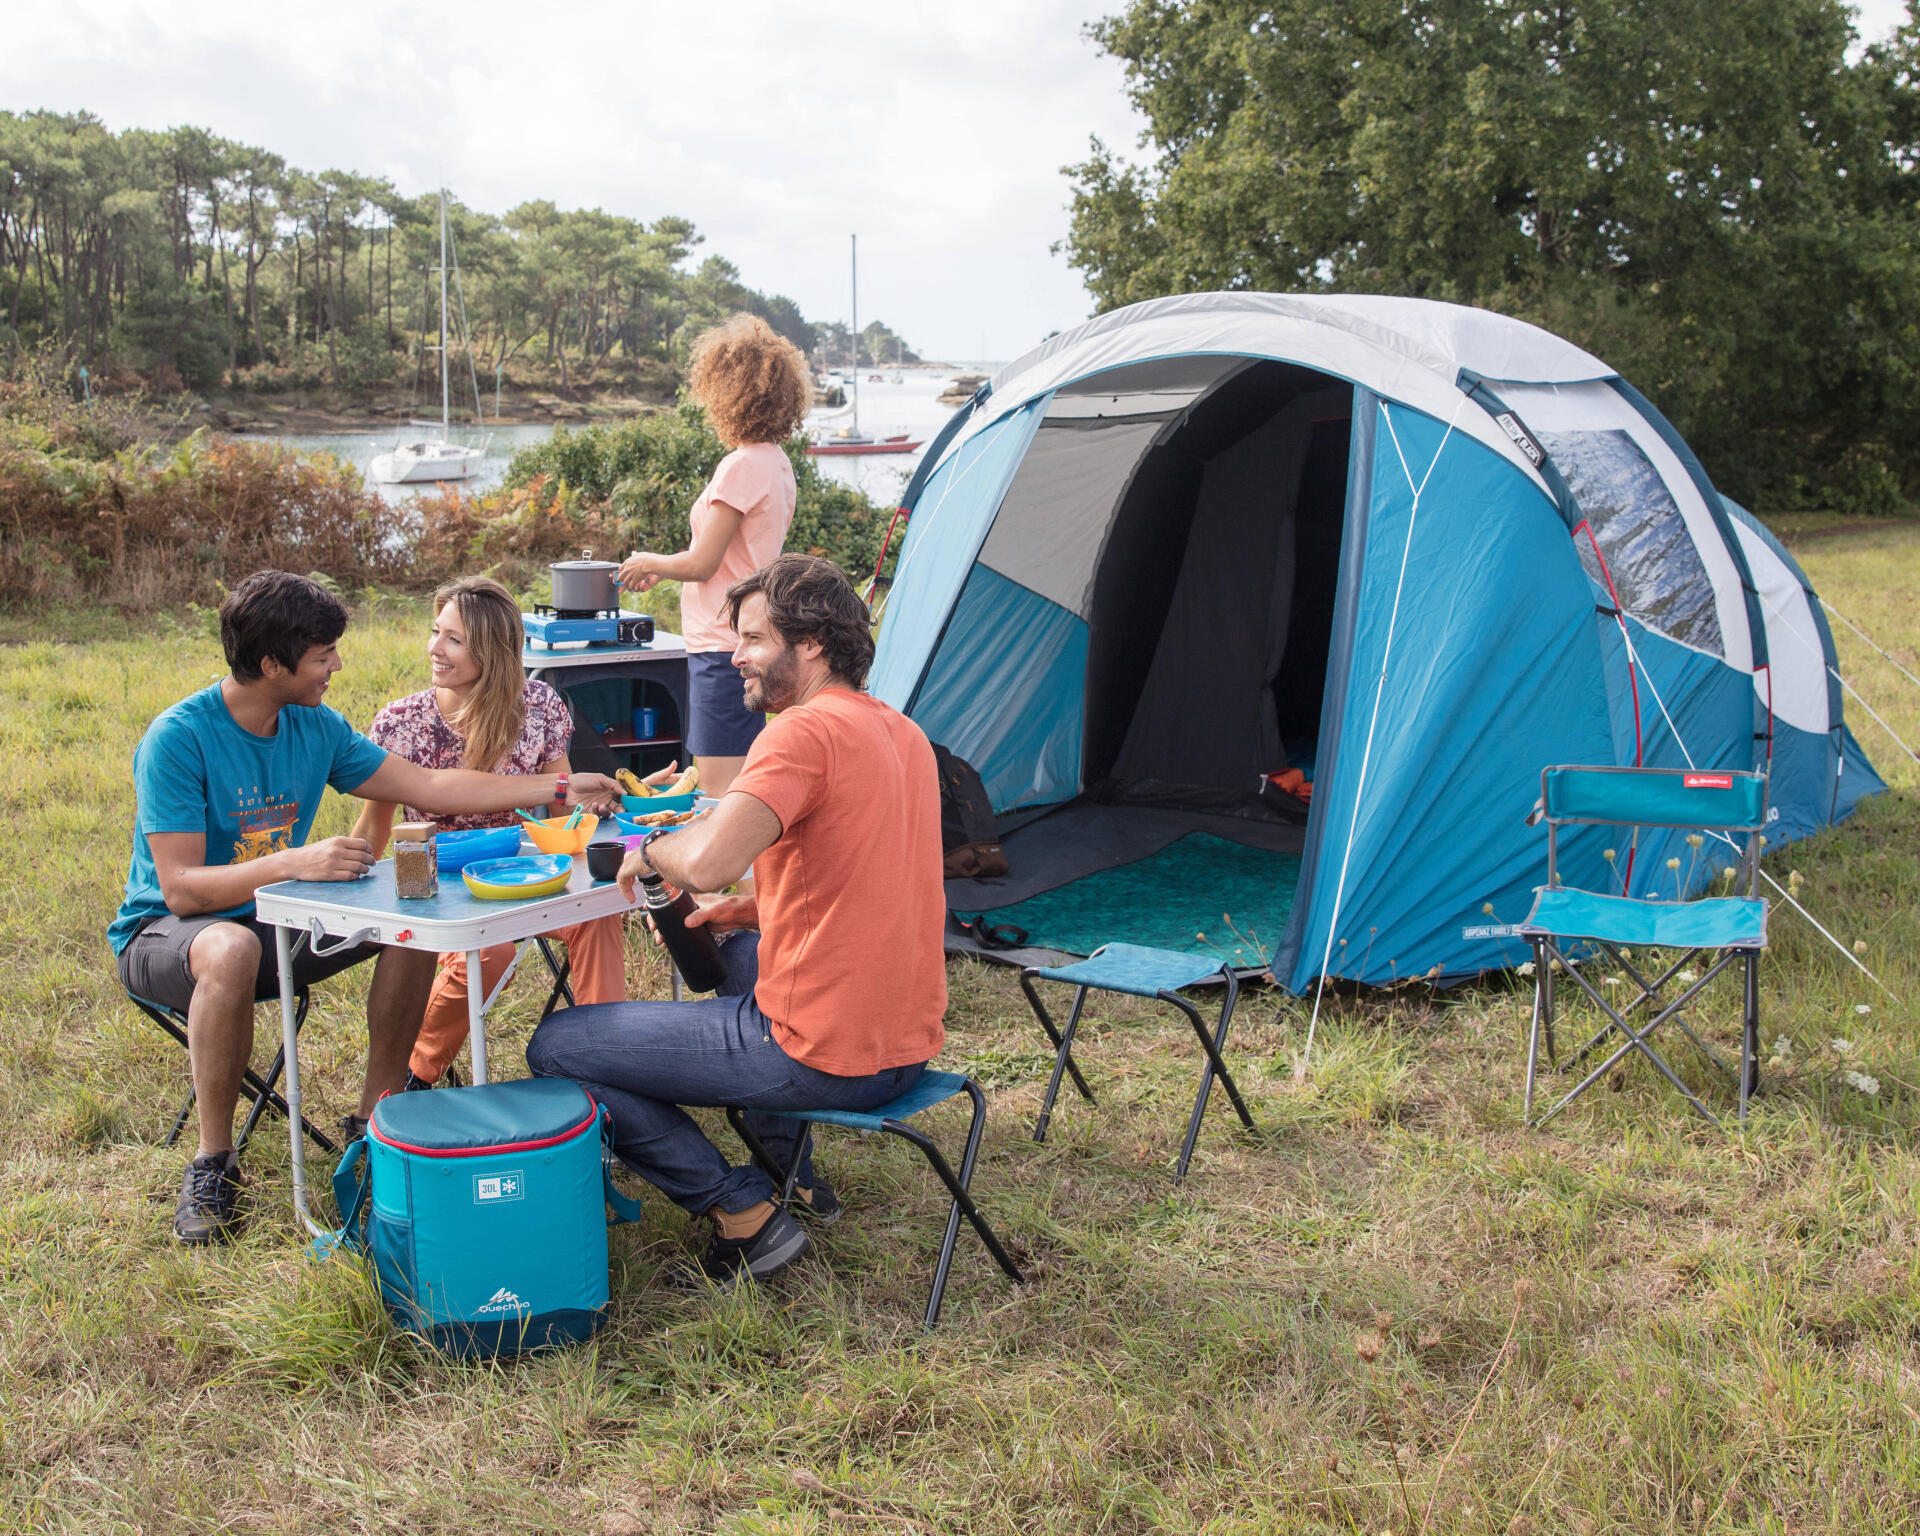 Let's discover more camping product in Decathlon HK